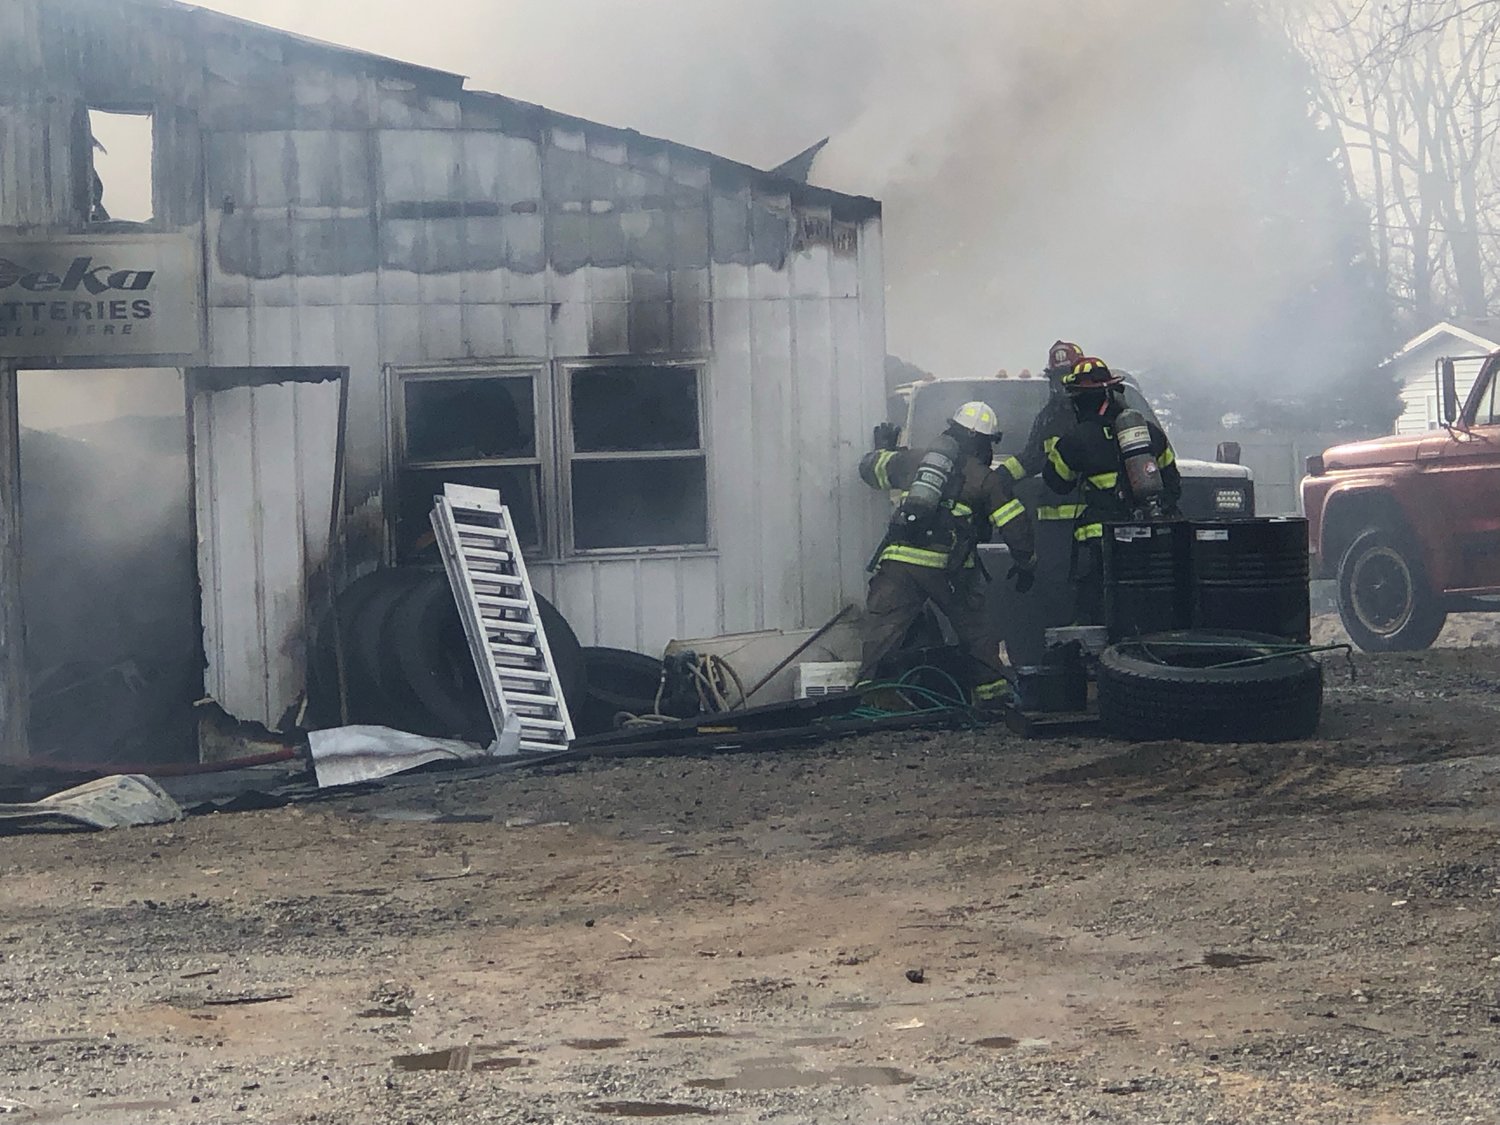 Firefighters from at least three departments are on the scene of a structure fire in the 100 block of East Wabash Street in Wingate. The fire was reported about 10:45 a.m. Wednesday at Bane Auto.